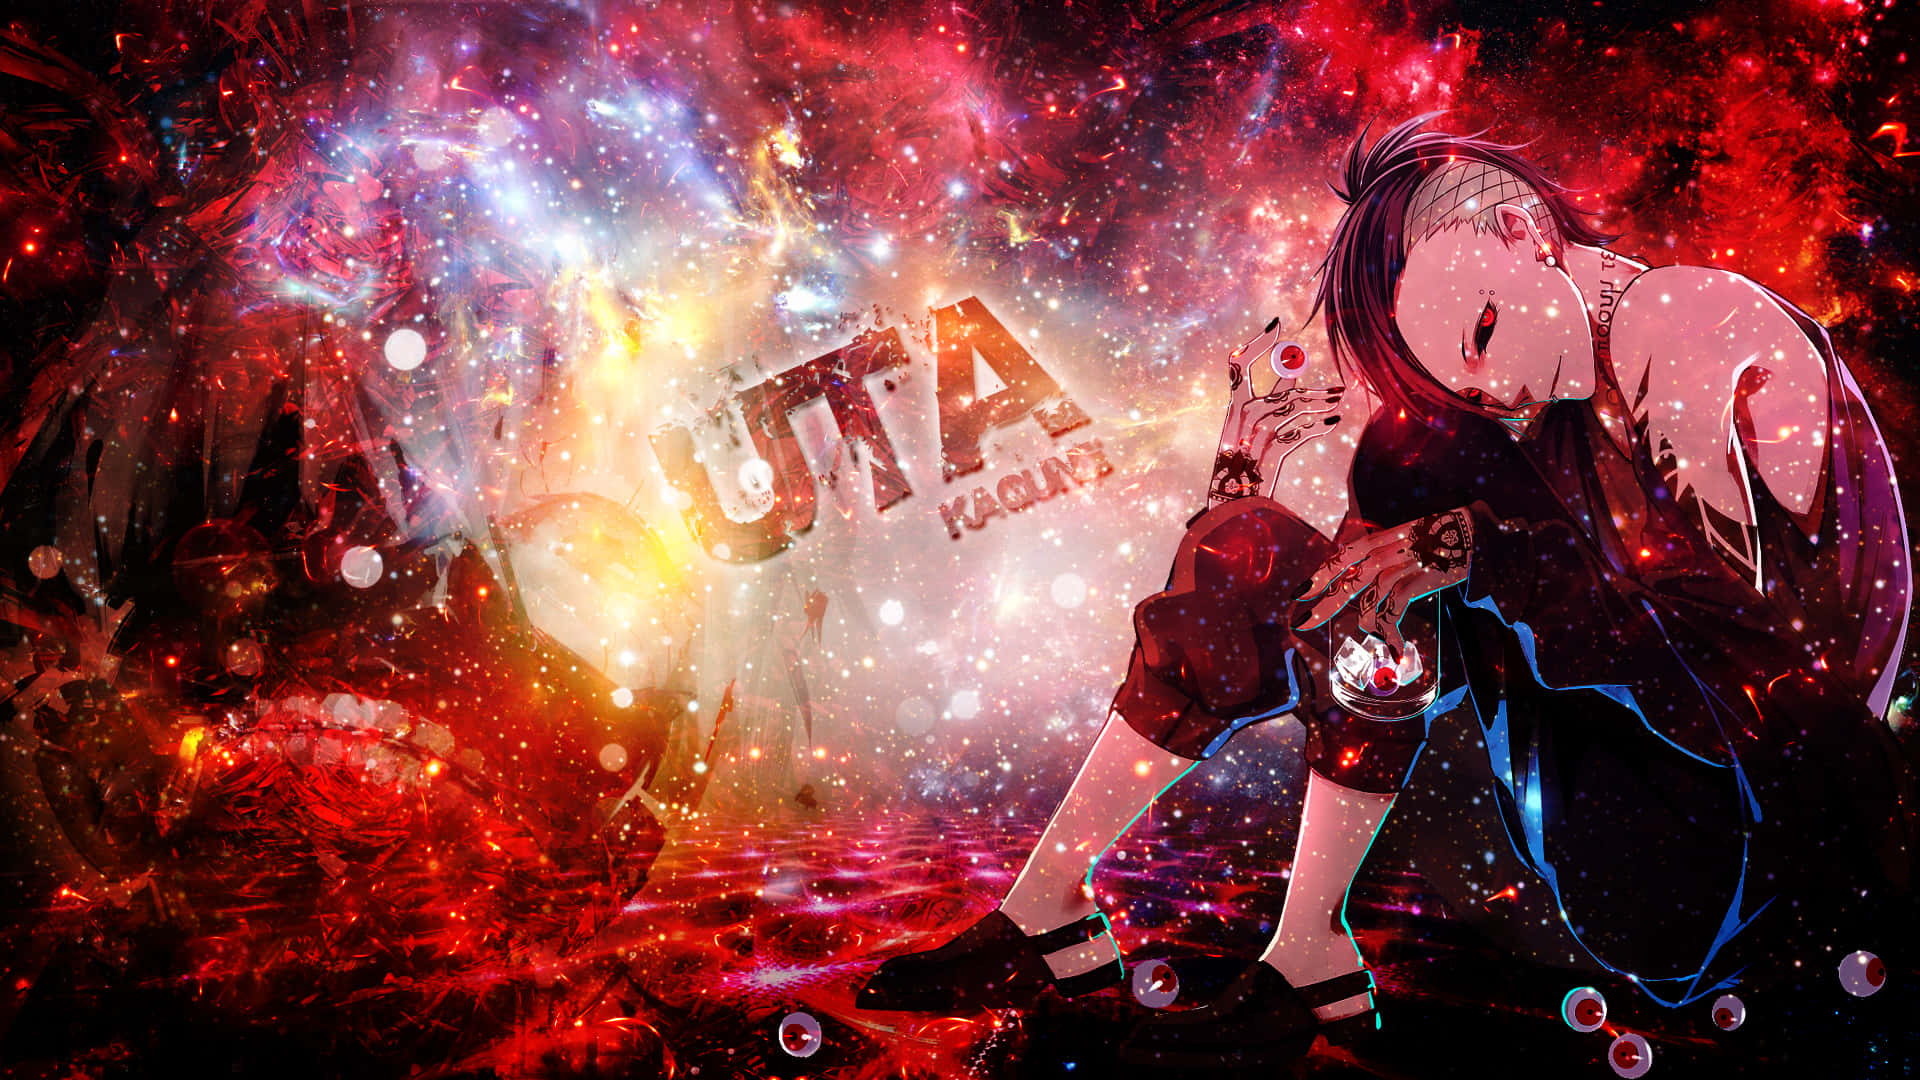 Mysterious and Alluring, Tokyo Ghoul Uta Portrait Wallpaper